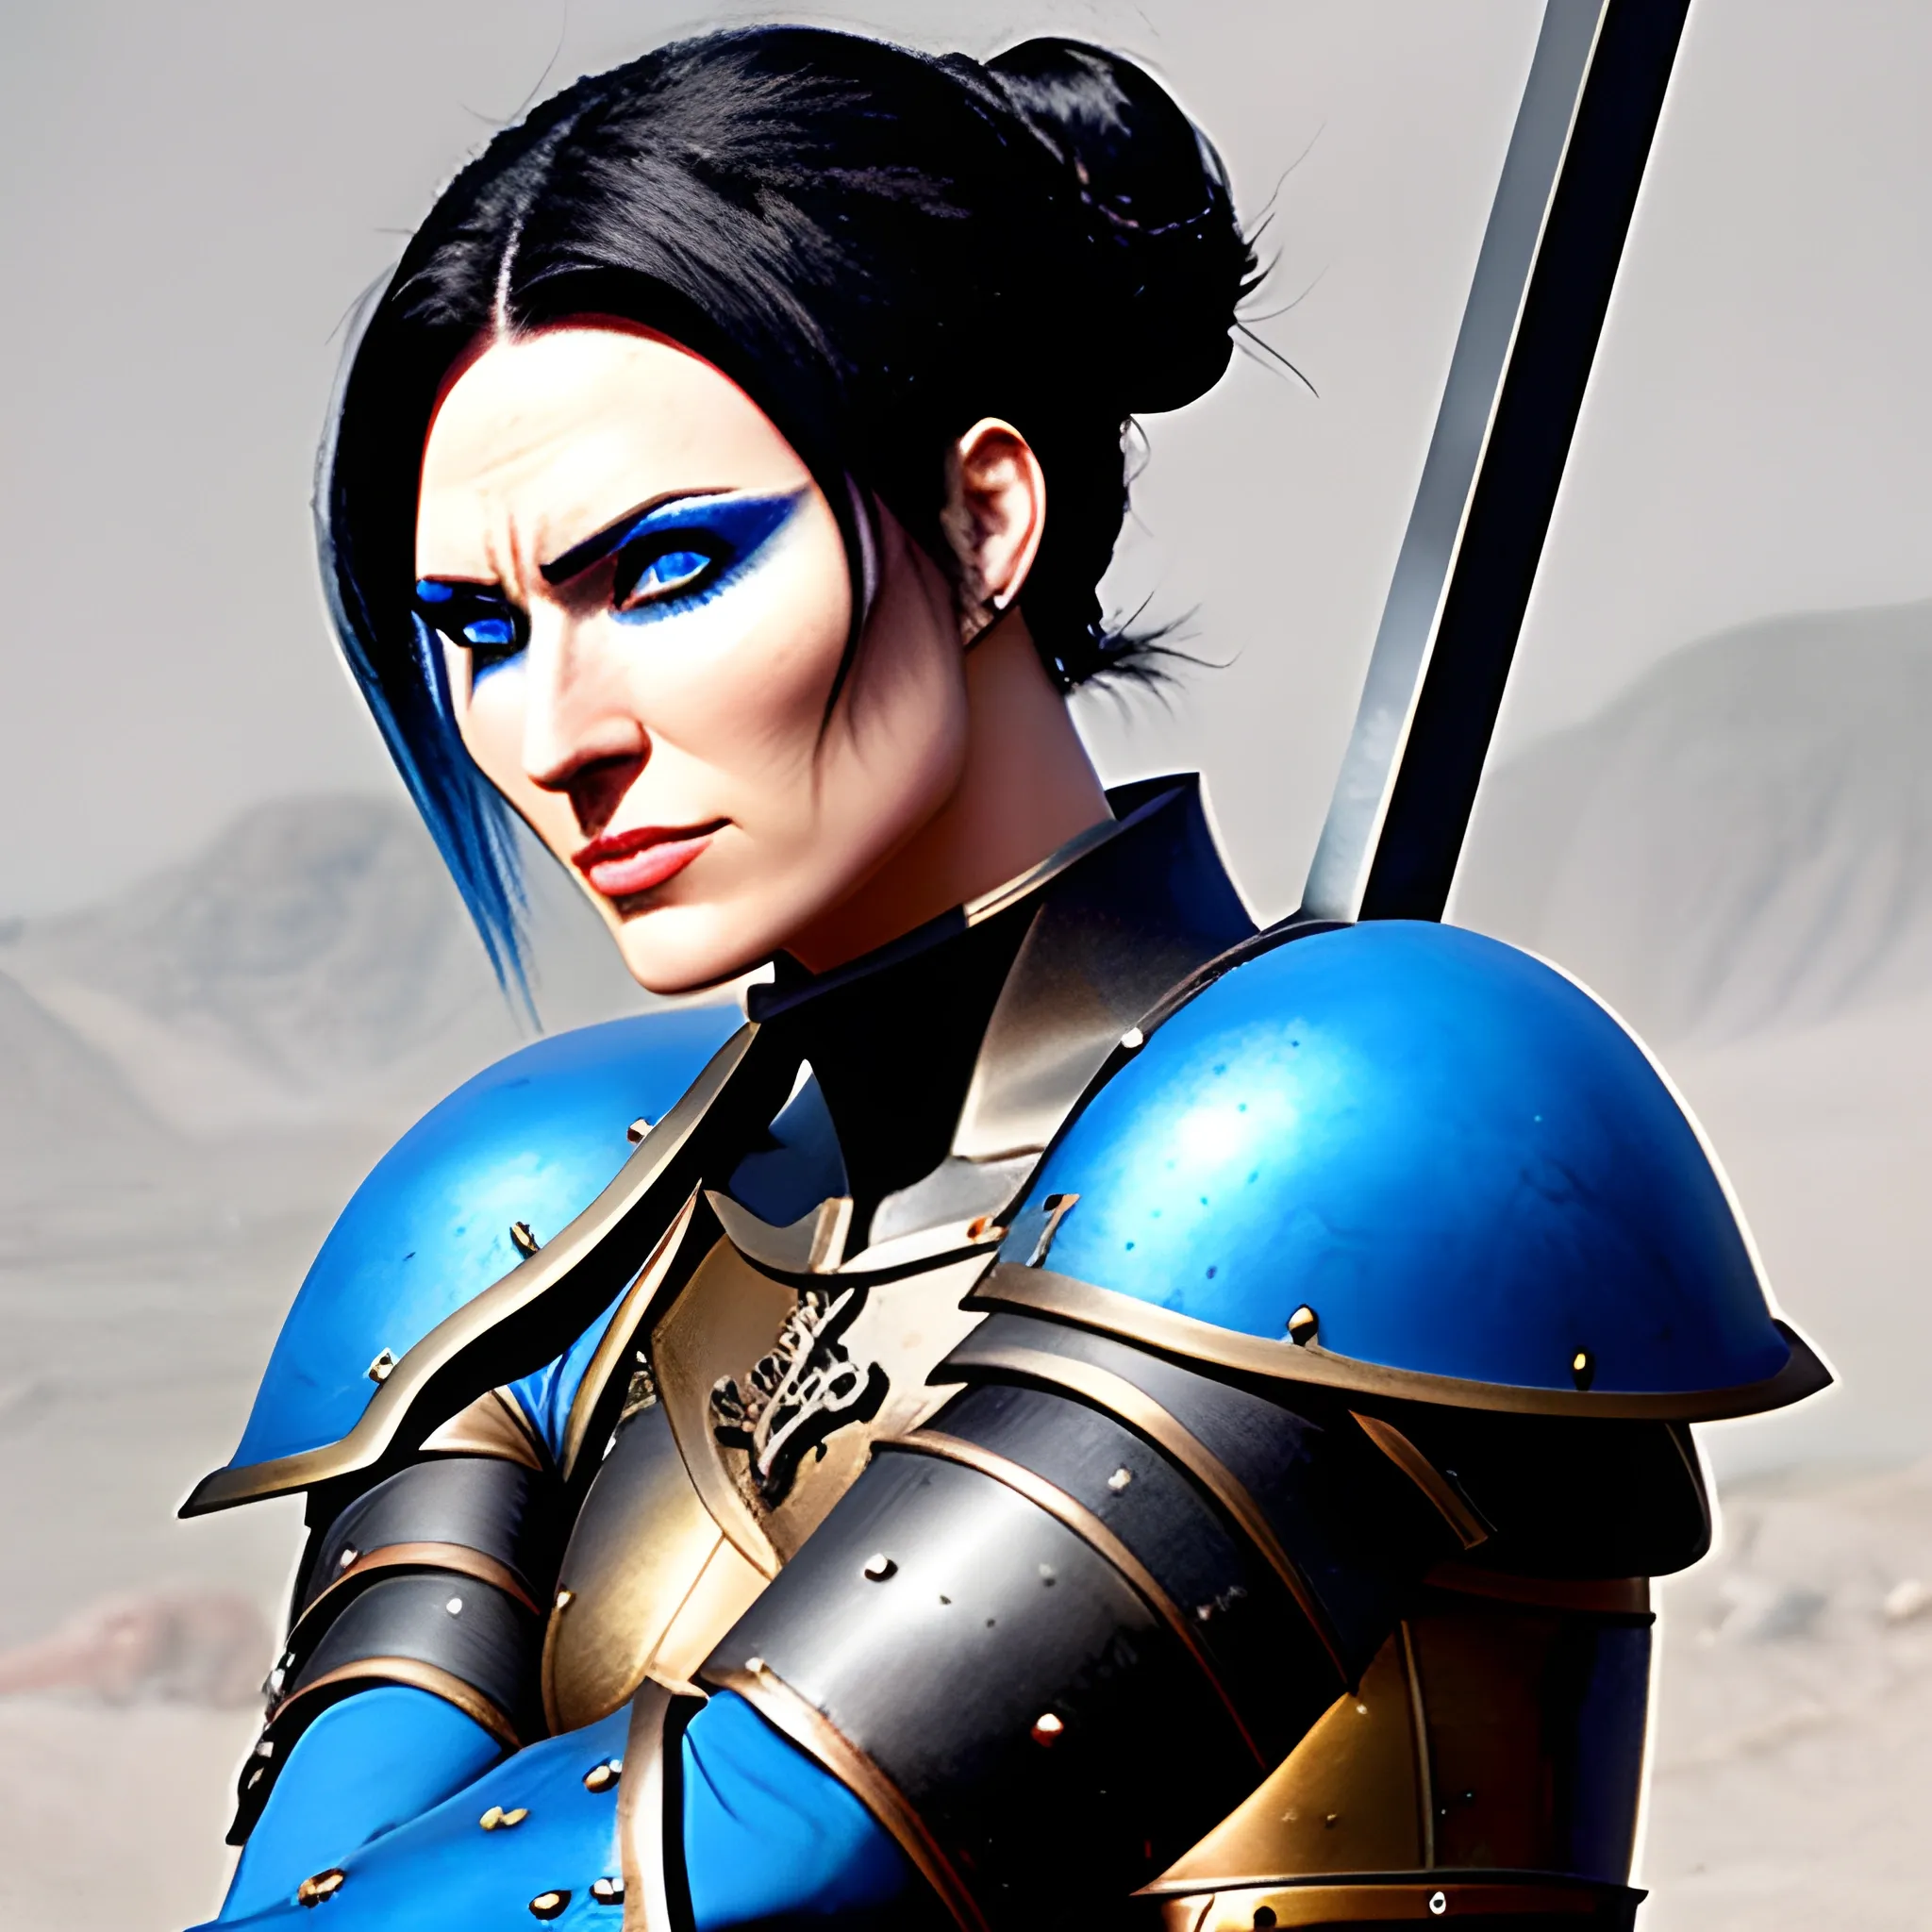 a medieval warrior girl with short black hair in a bun, blue eyes and pale skin, wielding a two-handed claymore